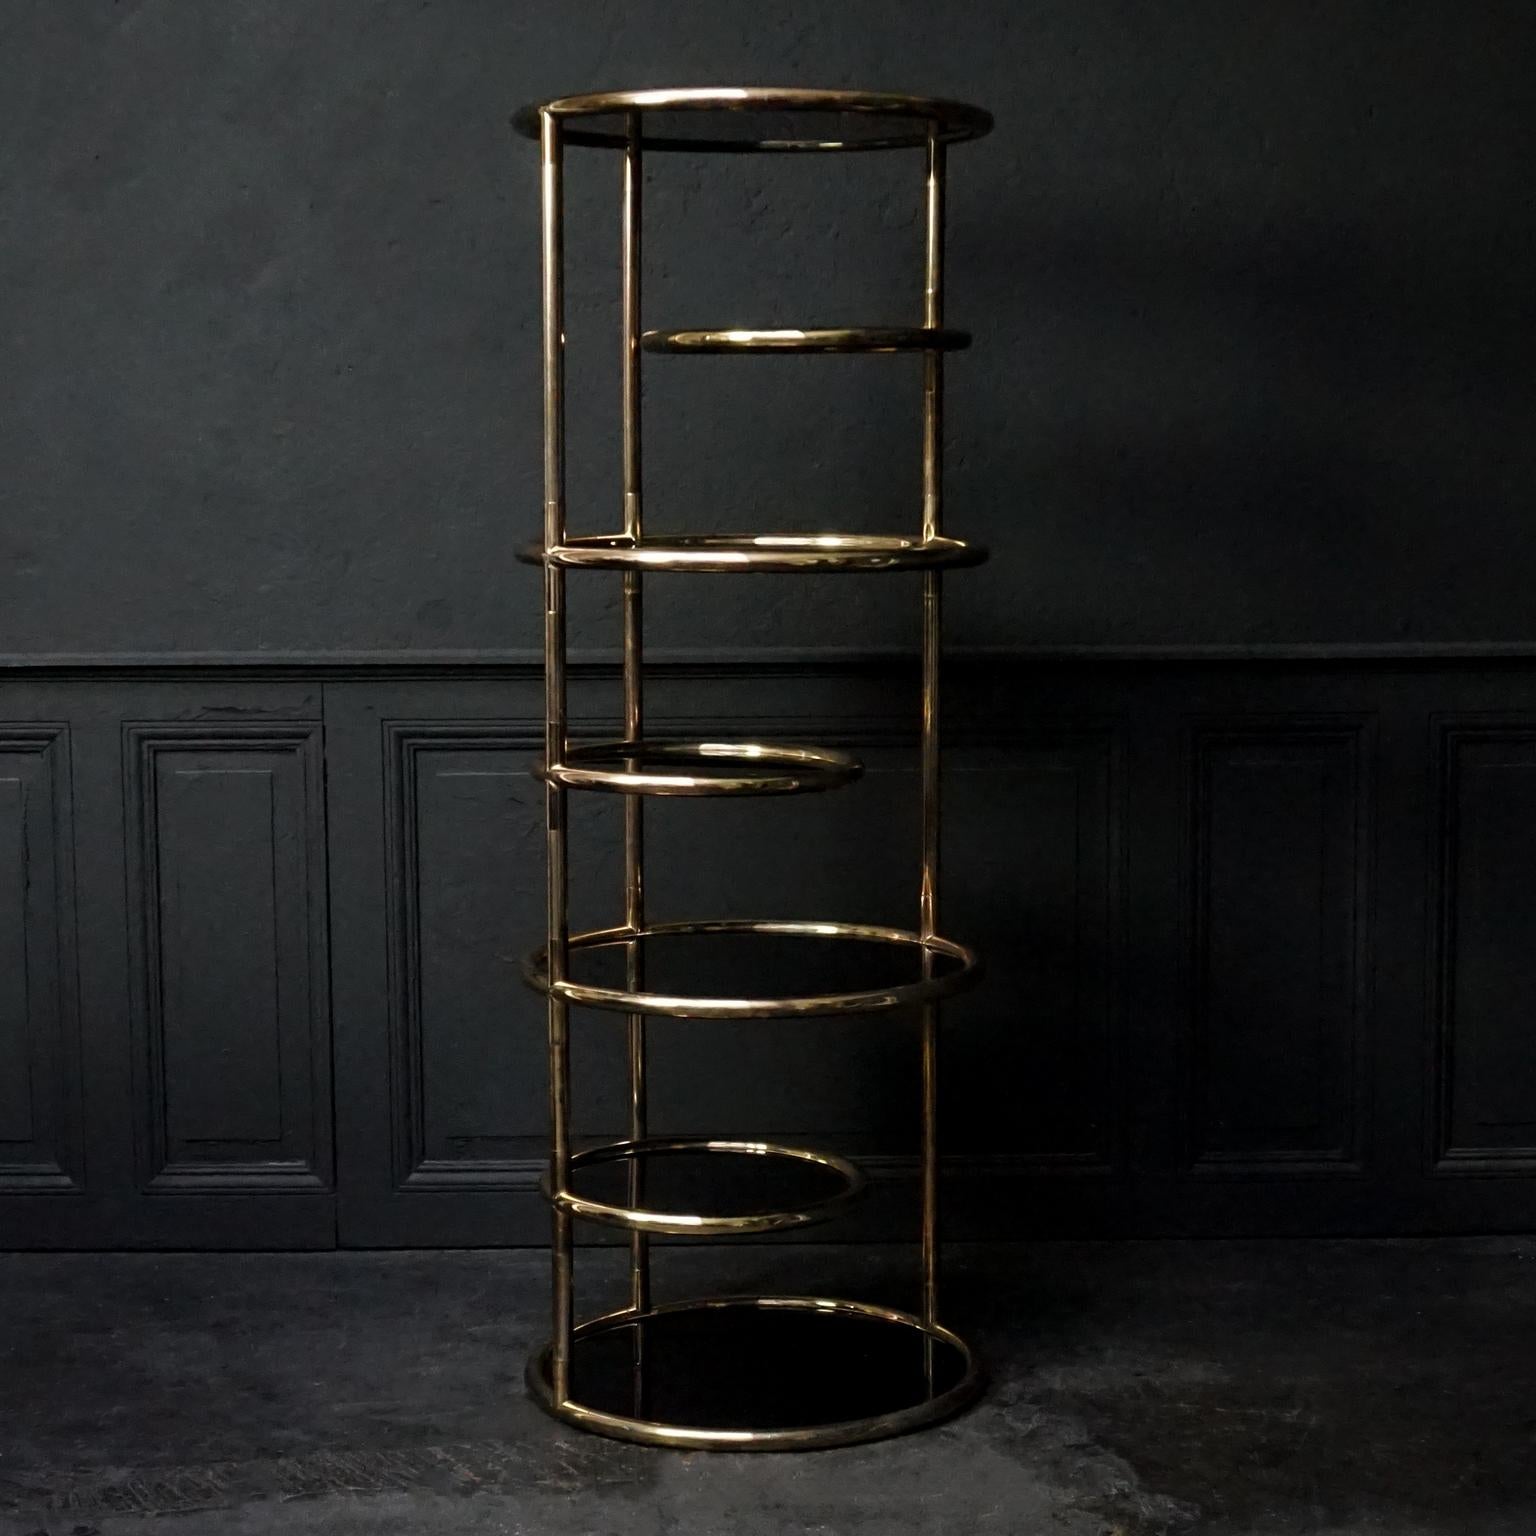 Beautiful vintage midcentury Hollywood Regency round brass and smoked glass seven tiered swivel étagère by or in the style of Milo Baughman.
Features seven circular 'shelf' surfaces. The three smaller ones swivel out independently to your desire and